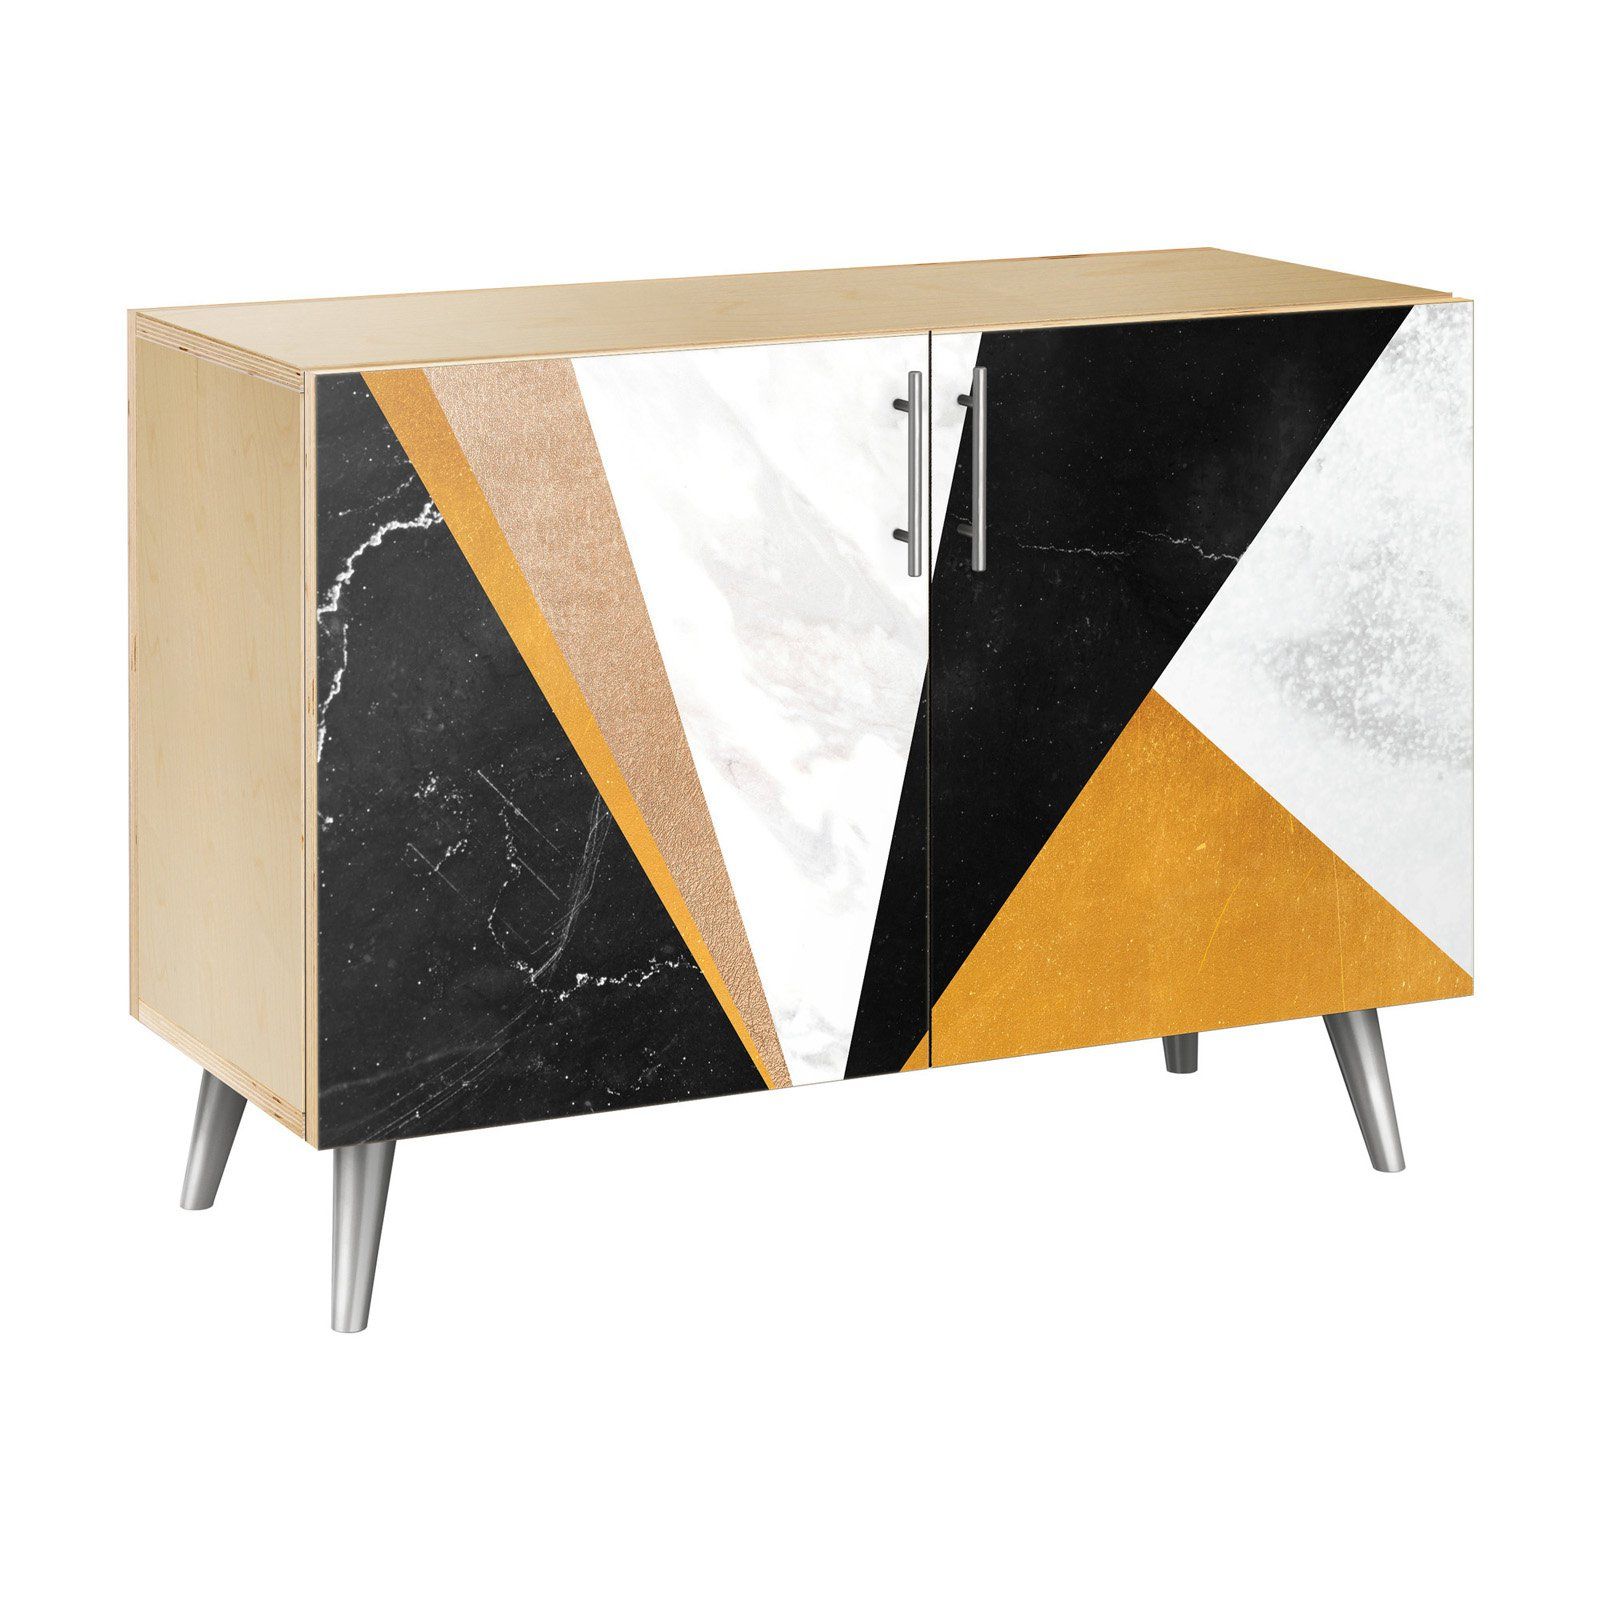 Nyekoncept Glamorous Geometry Flare Credenza | Products In Inside Longley Sideboards (View 21 of 30)